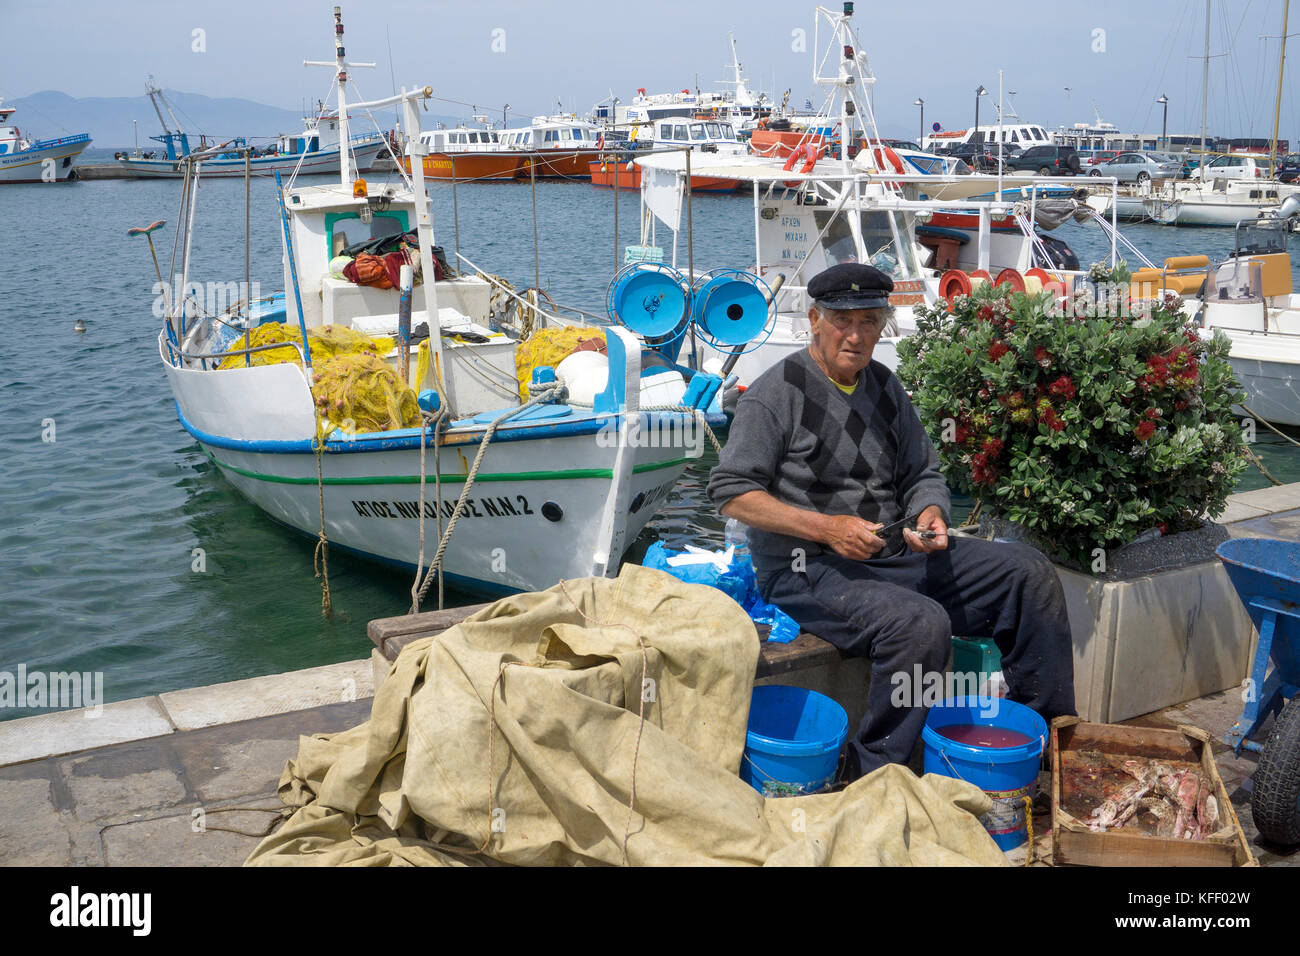 Fisherman cleans small catshark at the harbour of Naxos-town, Naxos island, Cyclades, Aegean, Greece Stock Photo